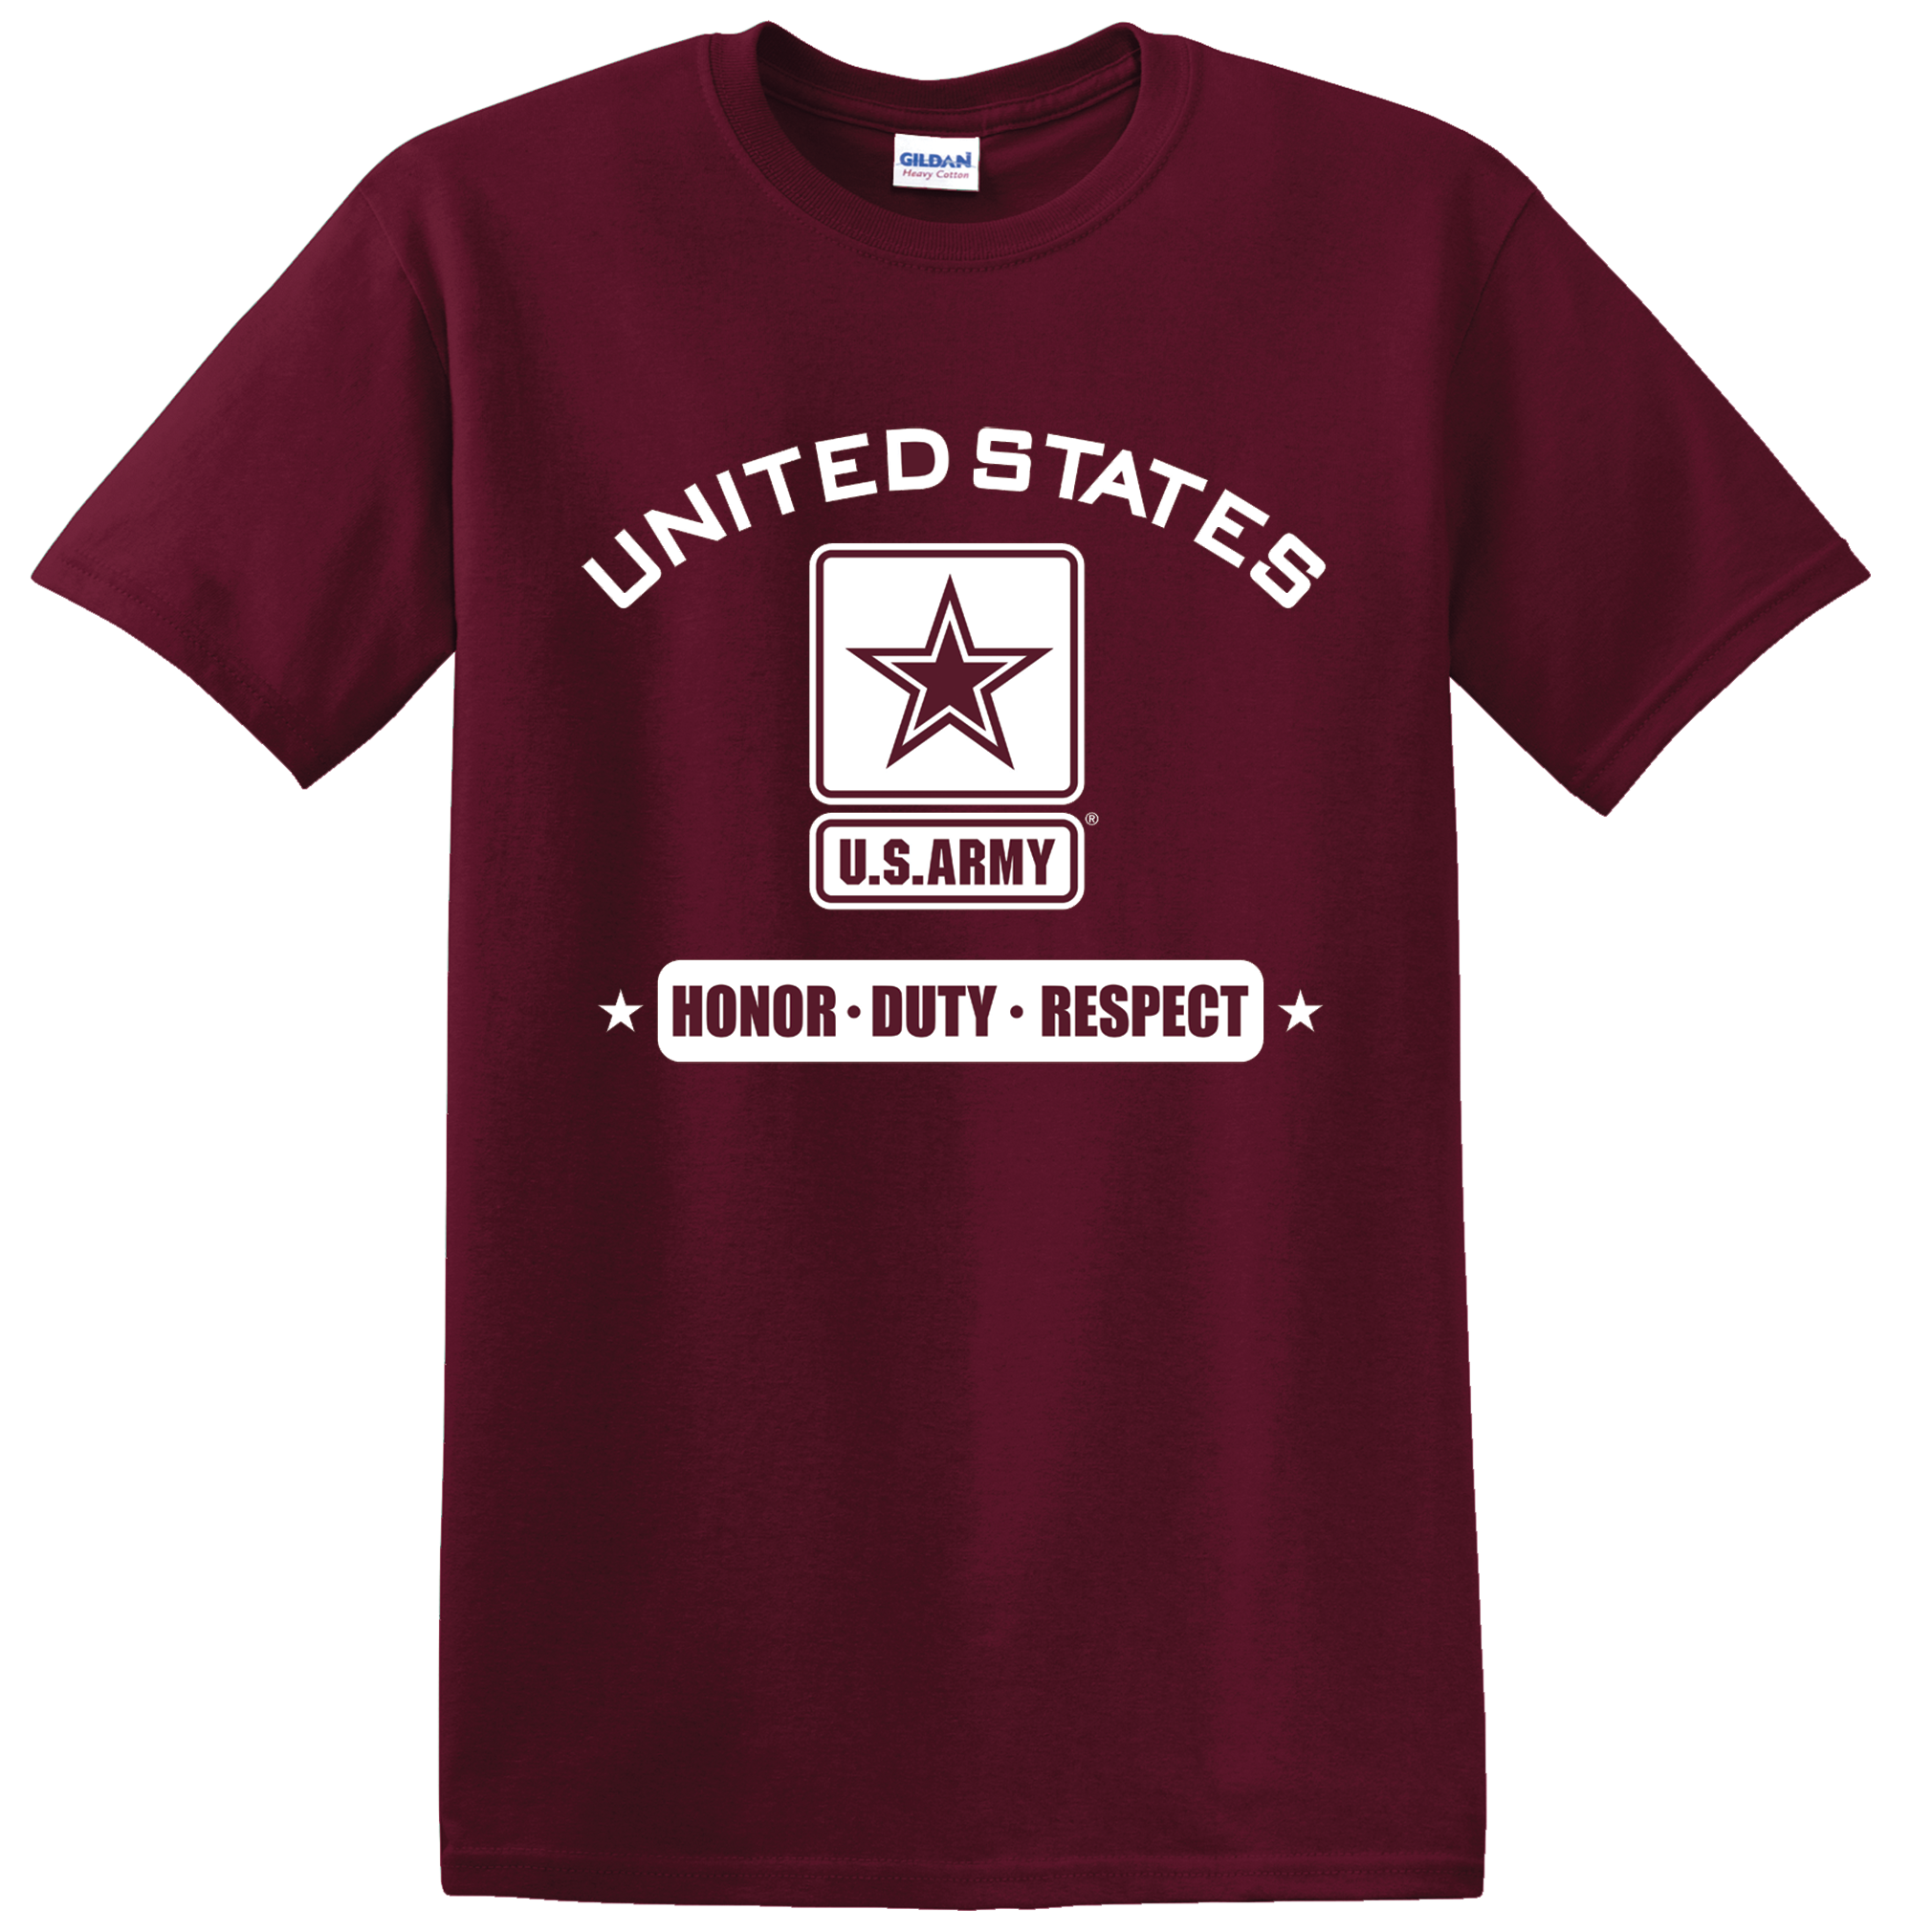 United States Army Honor Duty Respect with Army Star on Unisex Short Sleeve T-Shirt